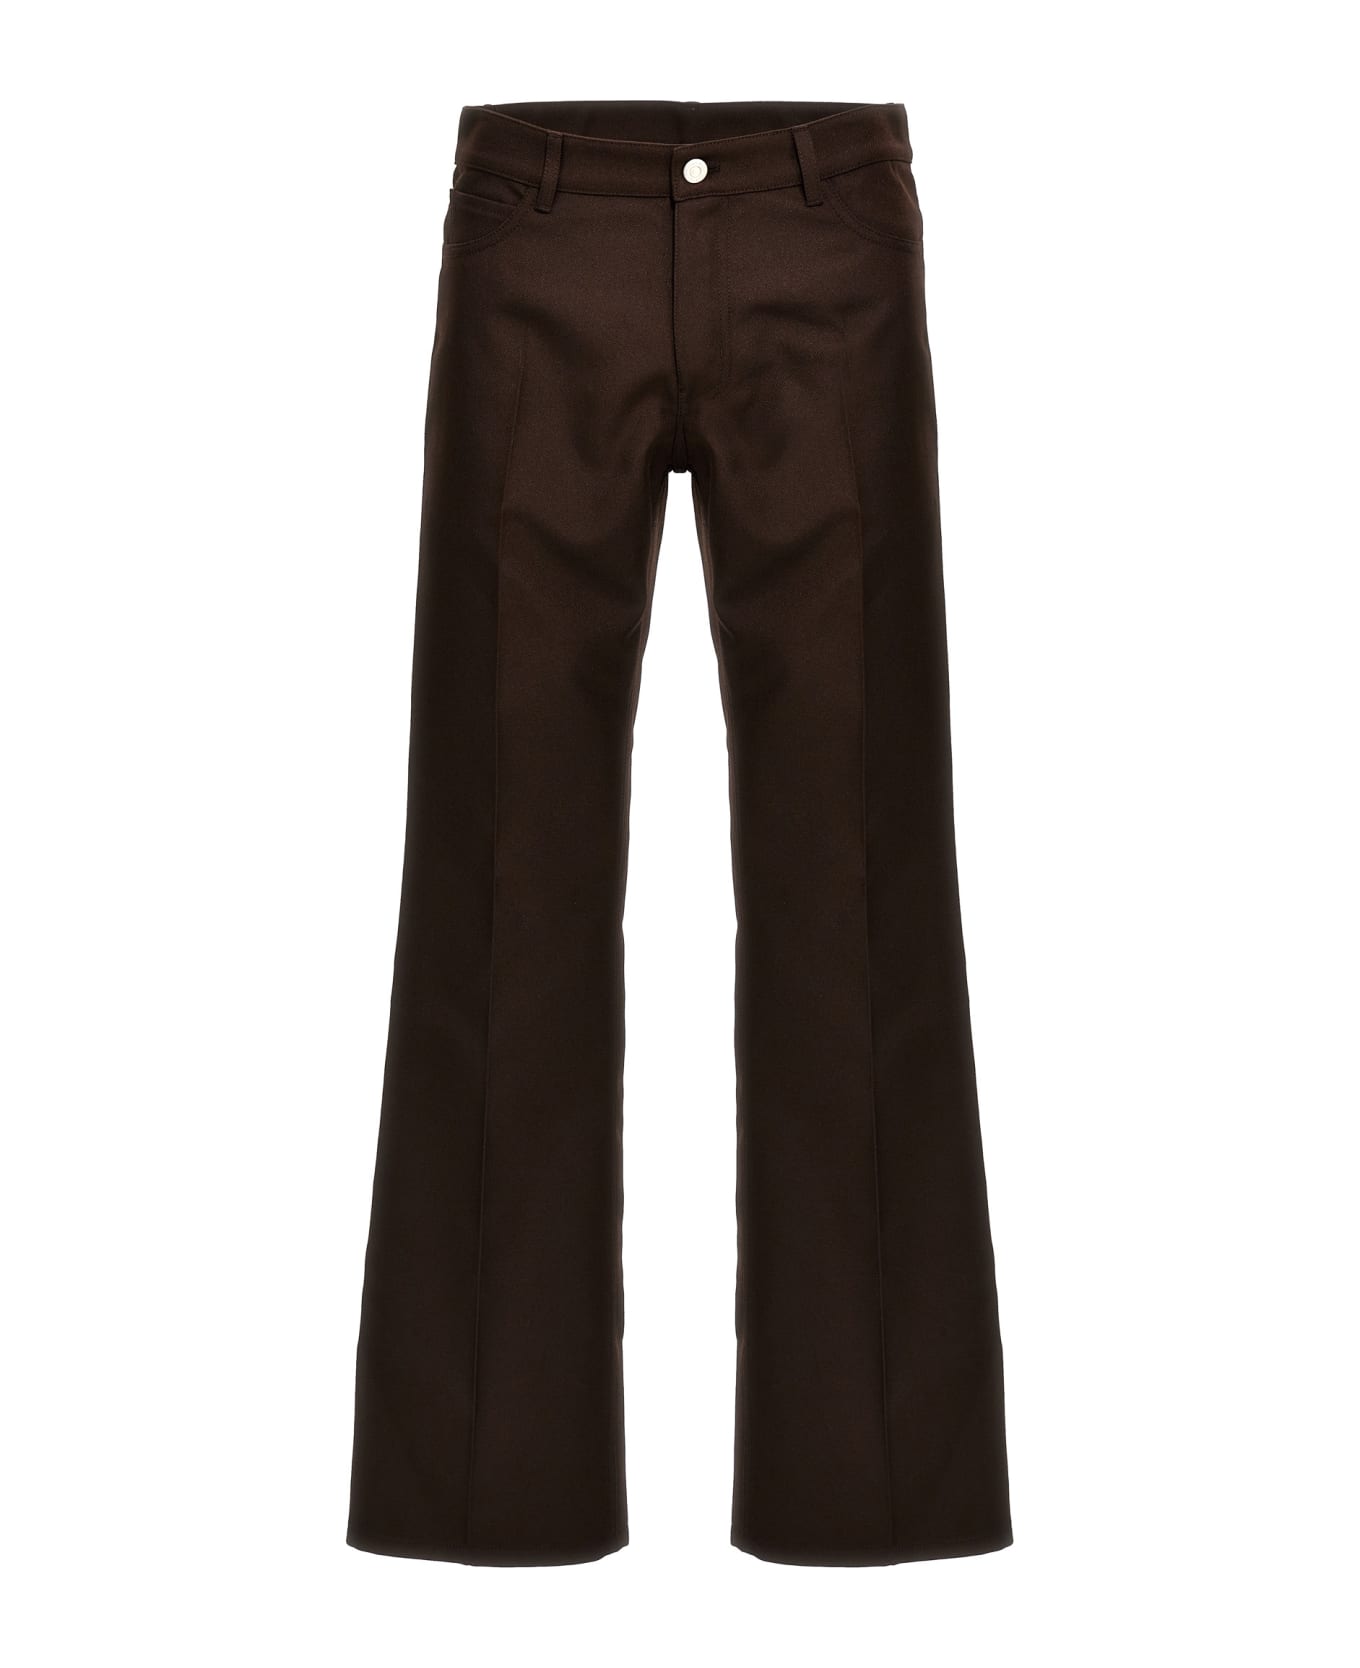 Courrèges '70's Bootcut' Pants - Brown ボトムス